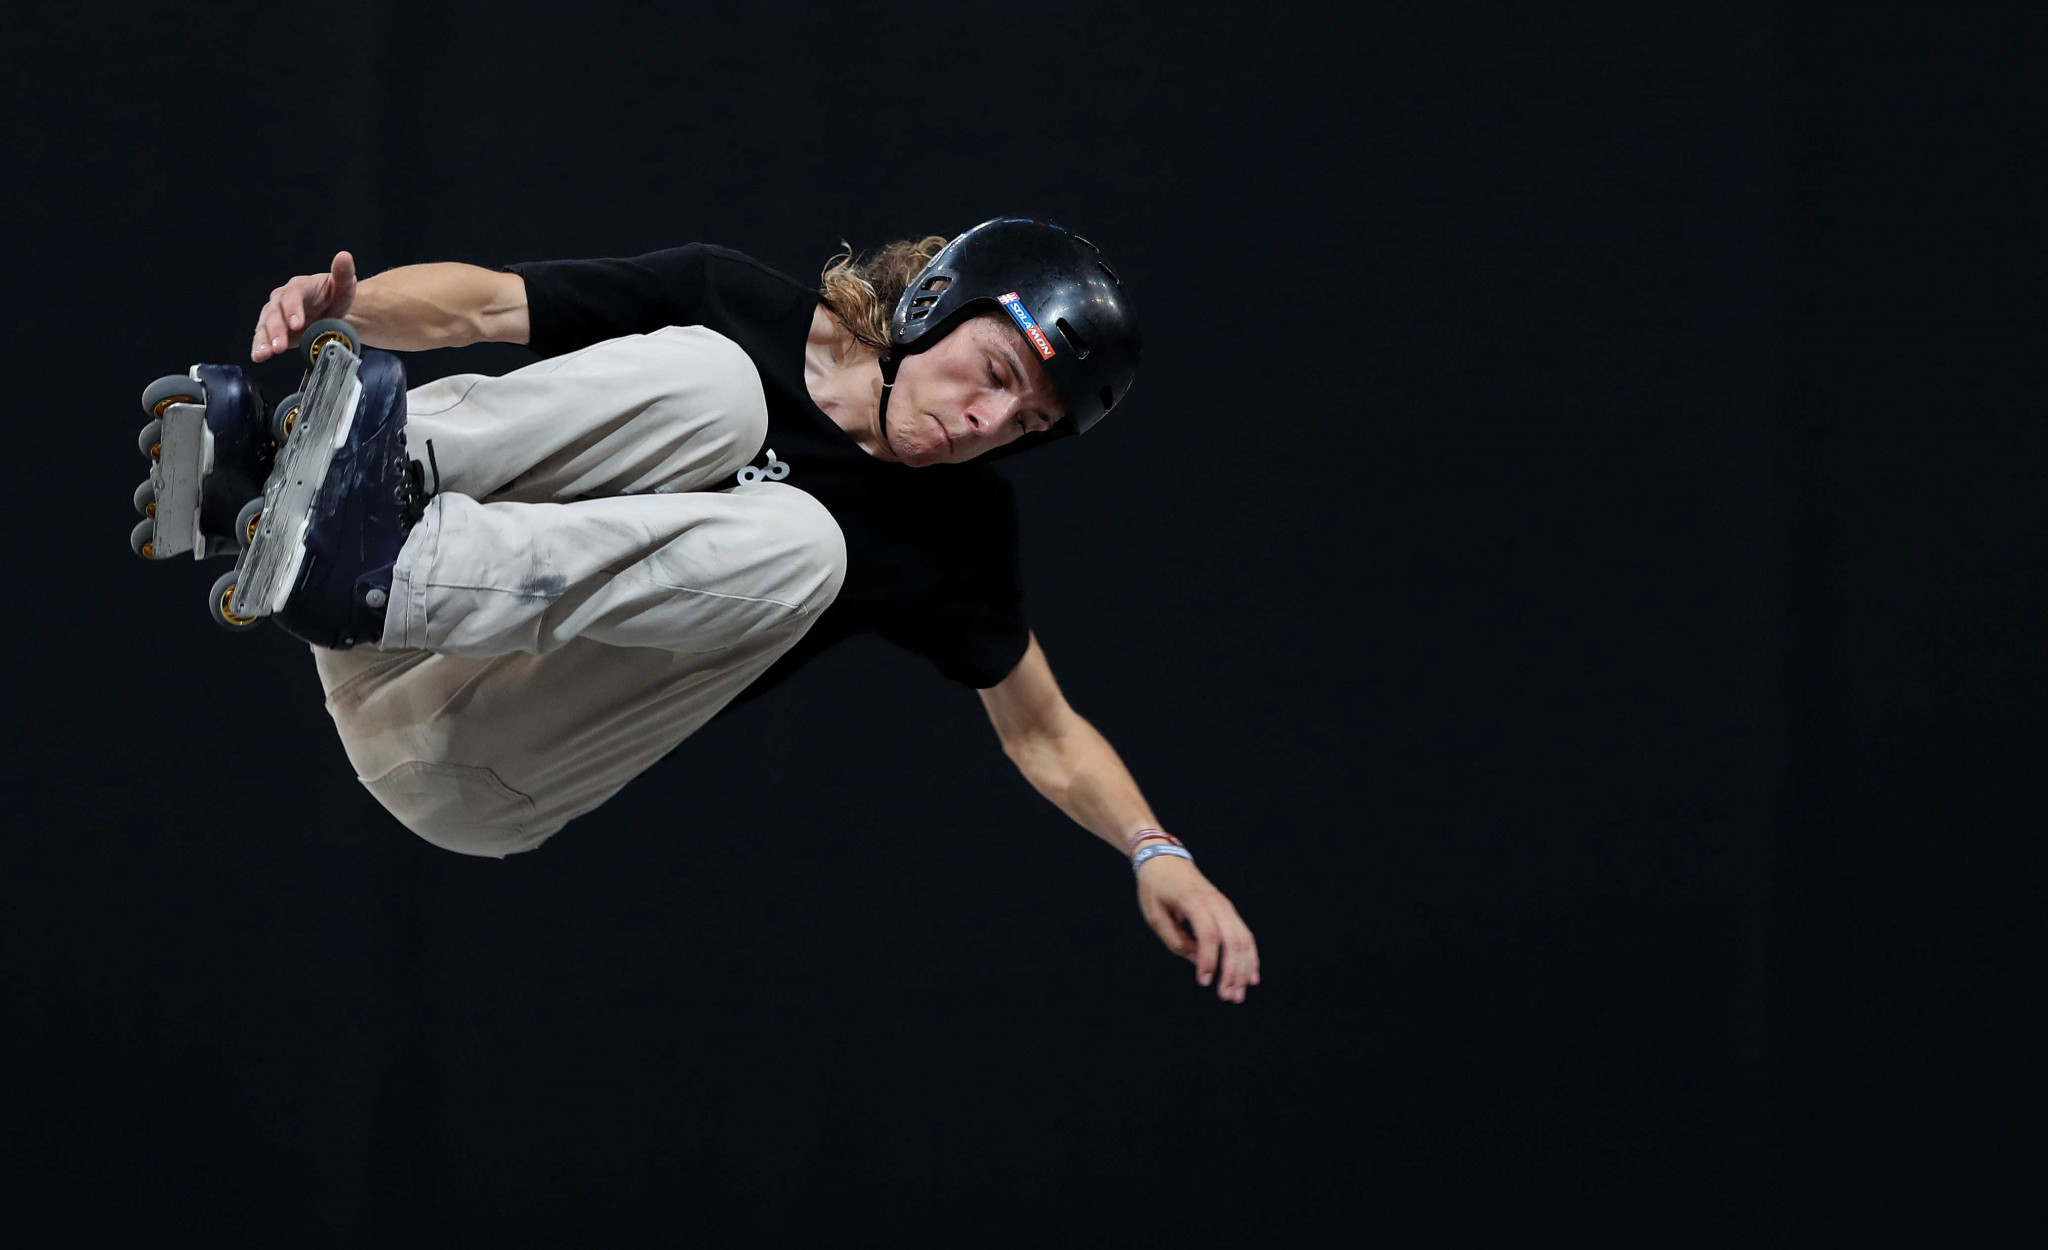 Joe Atkinson topped the standings in the roller freestyle ©M. Casanova/WRG